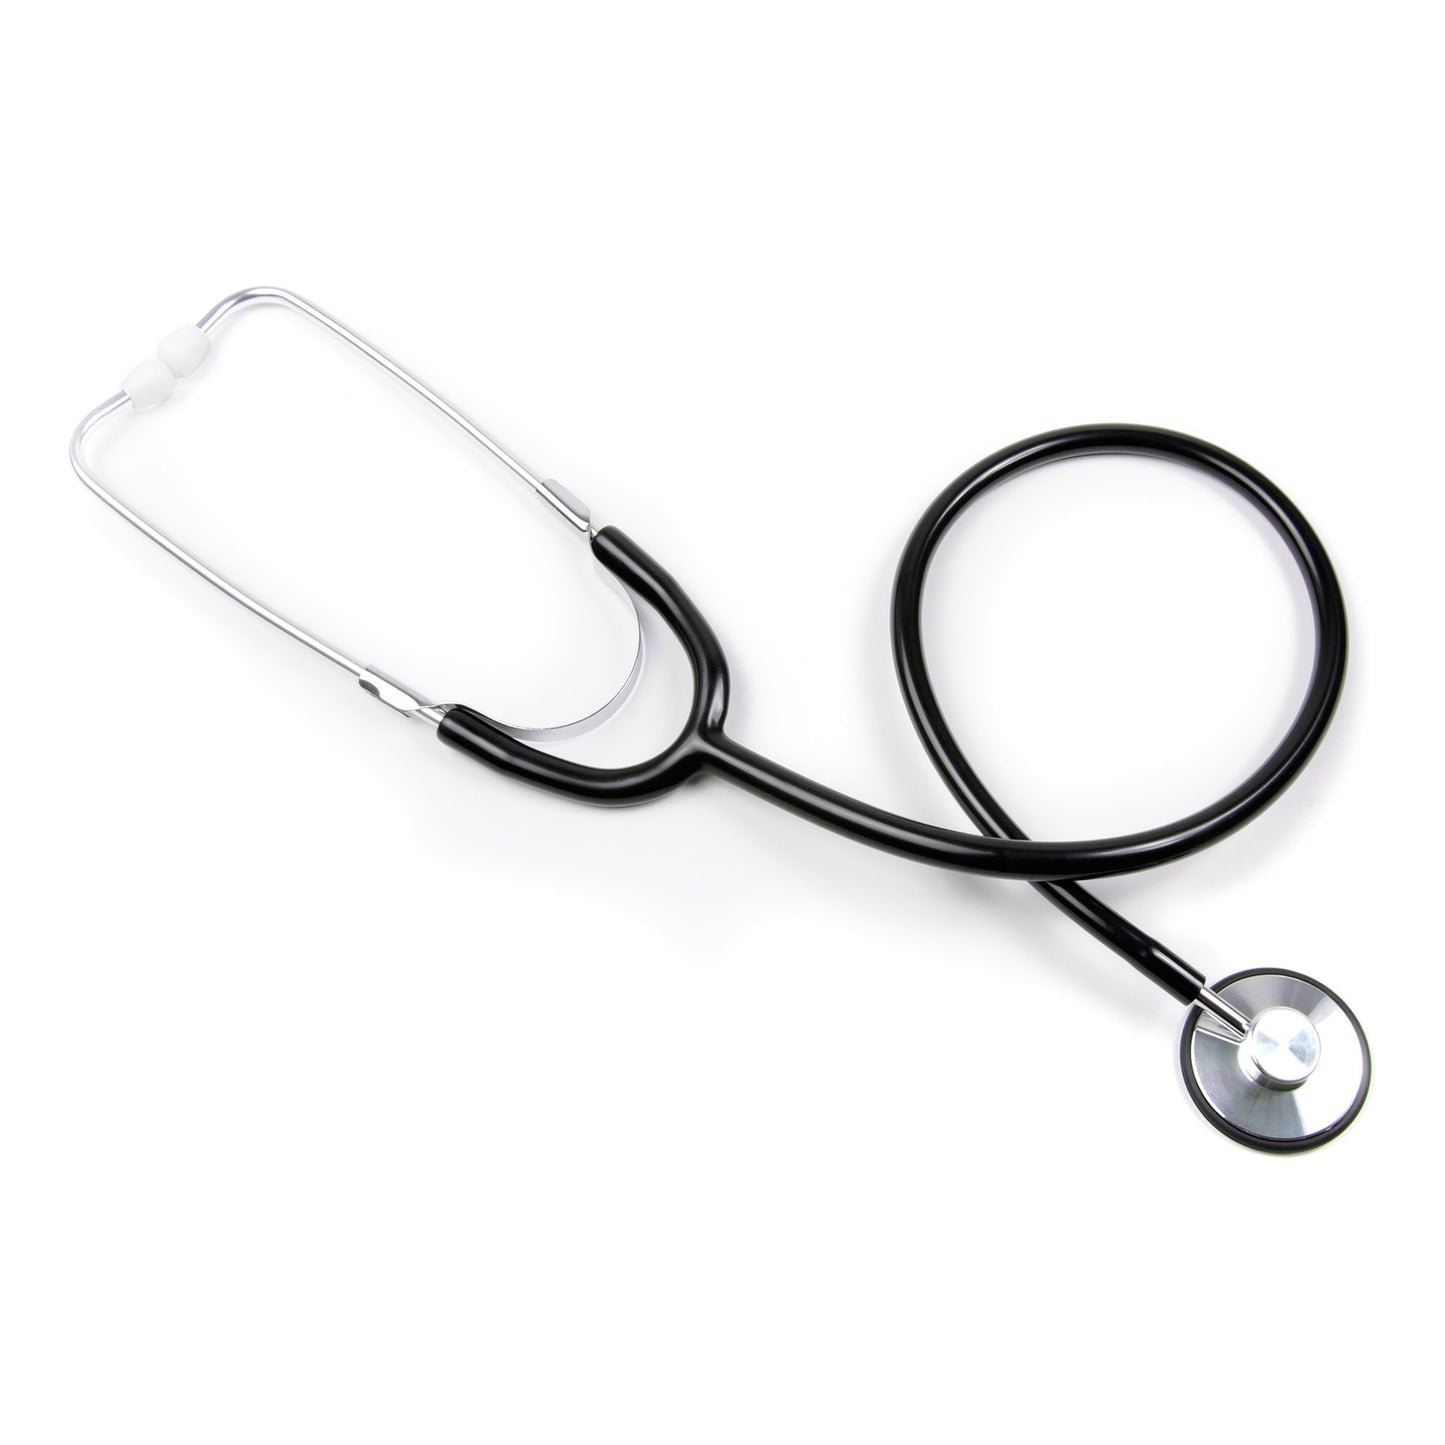 Basic Stethoscope, Sold As 1/Each Mckesson 01-660Hbkgm